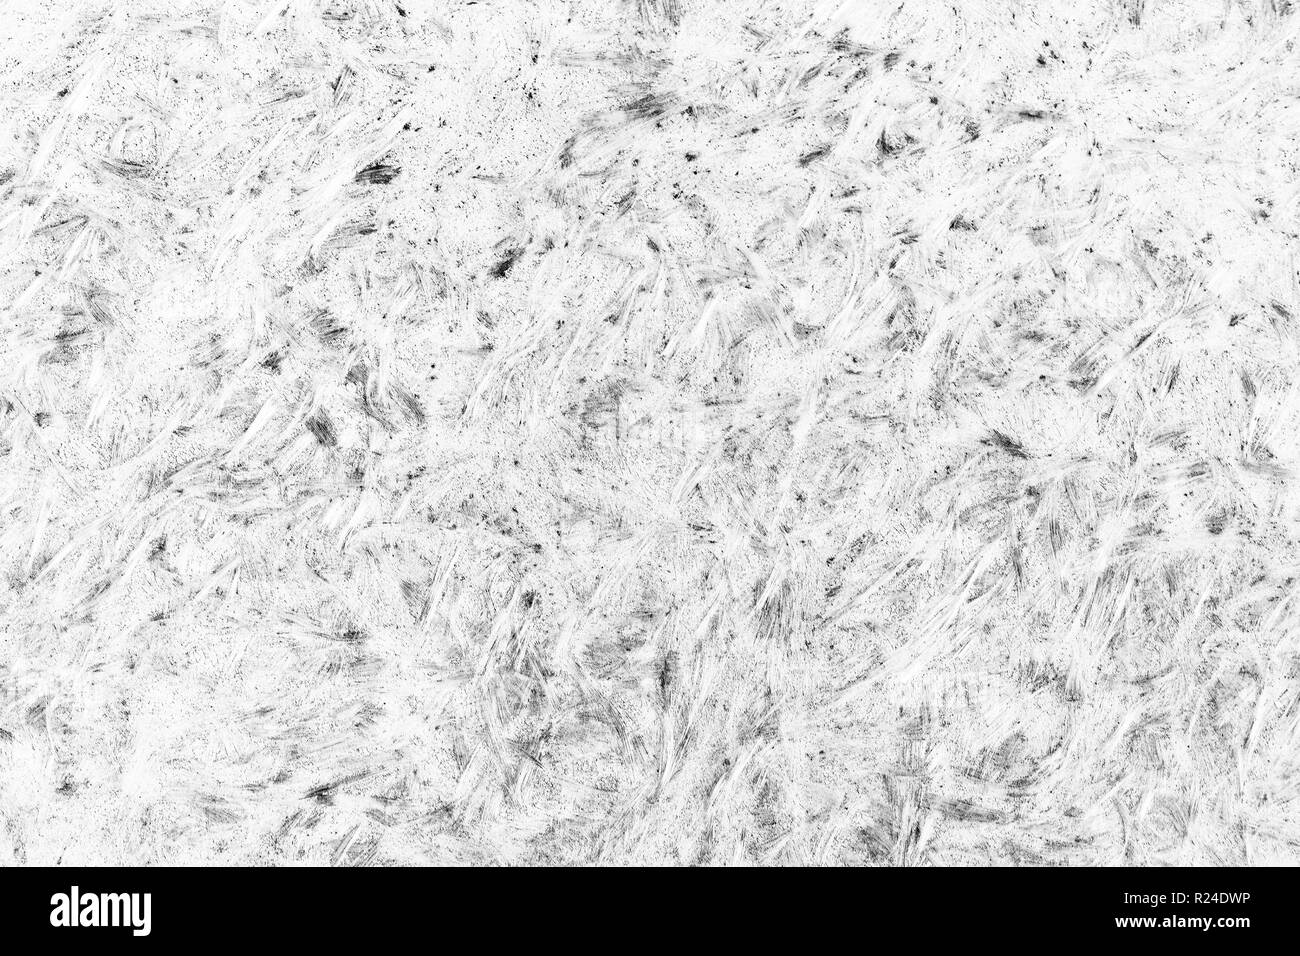 abstract with white hairs background Stock Photo